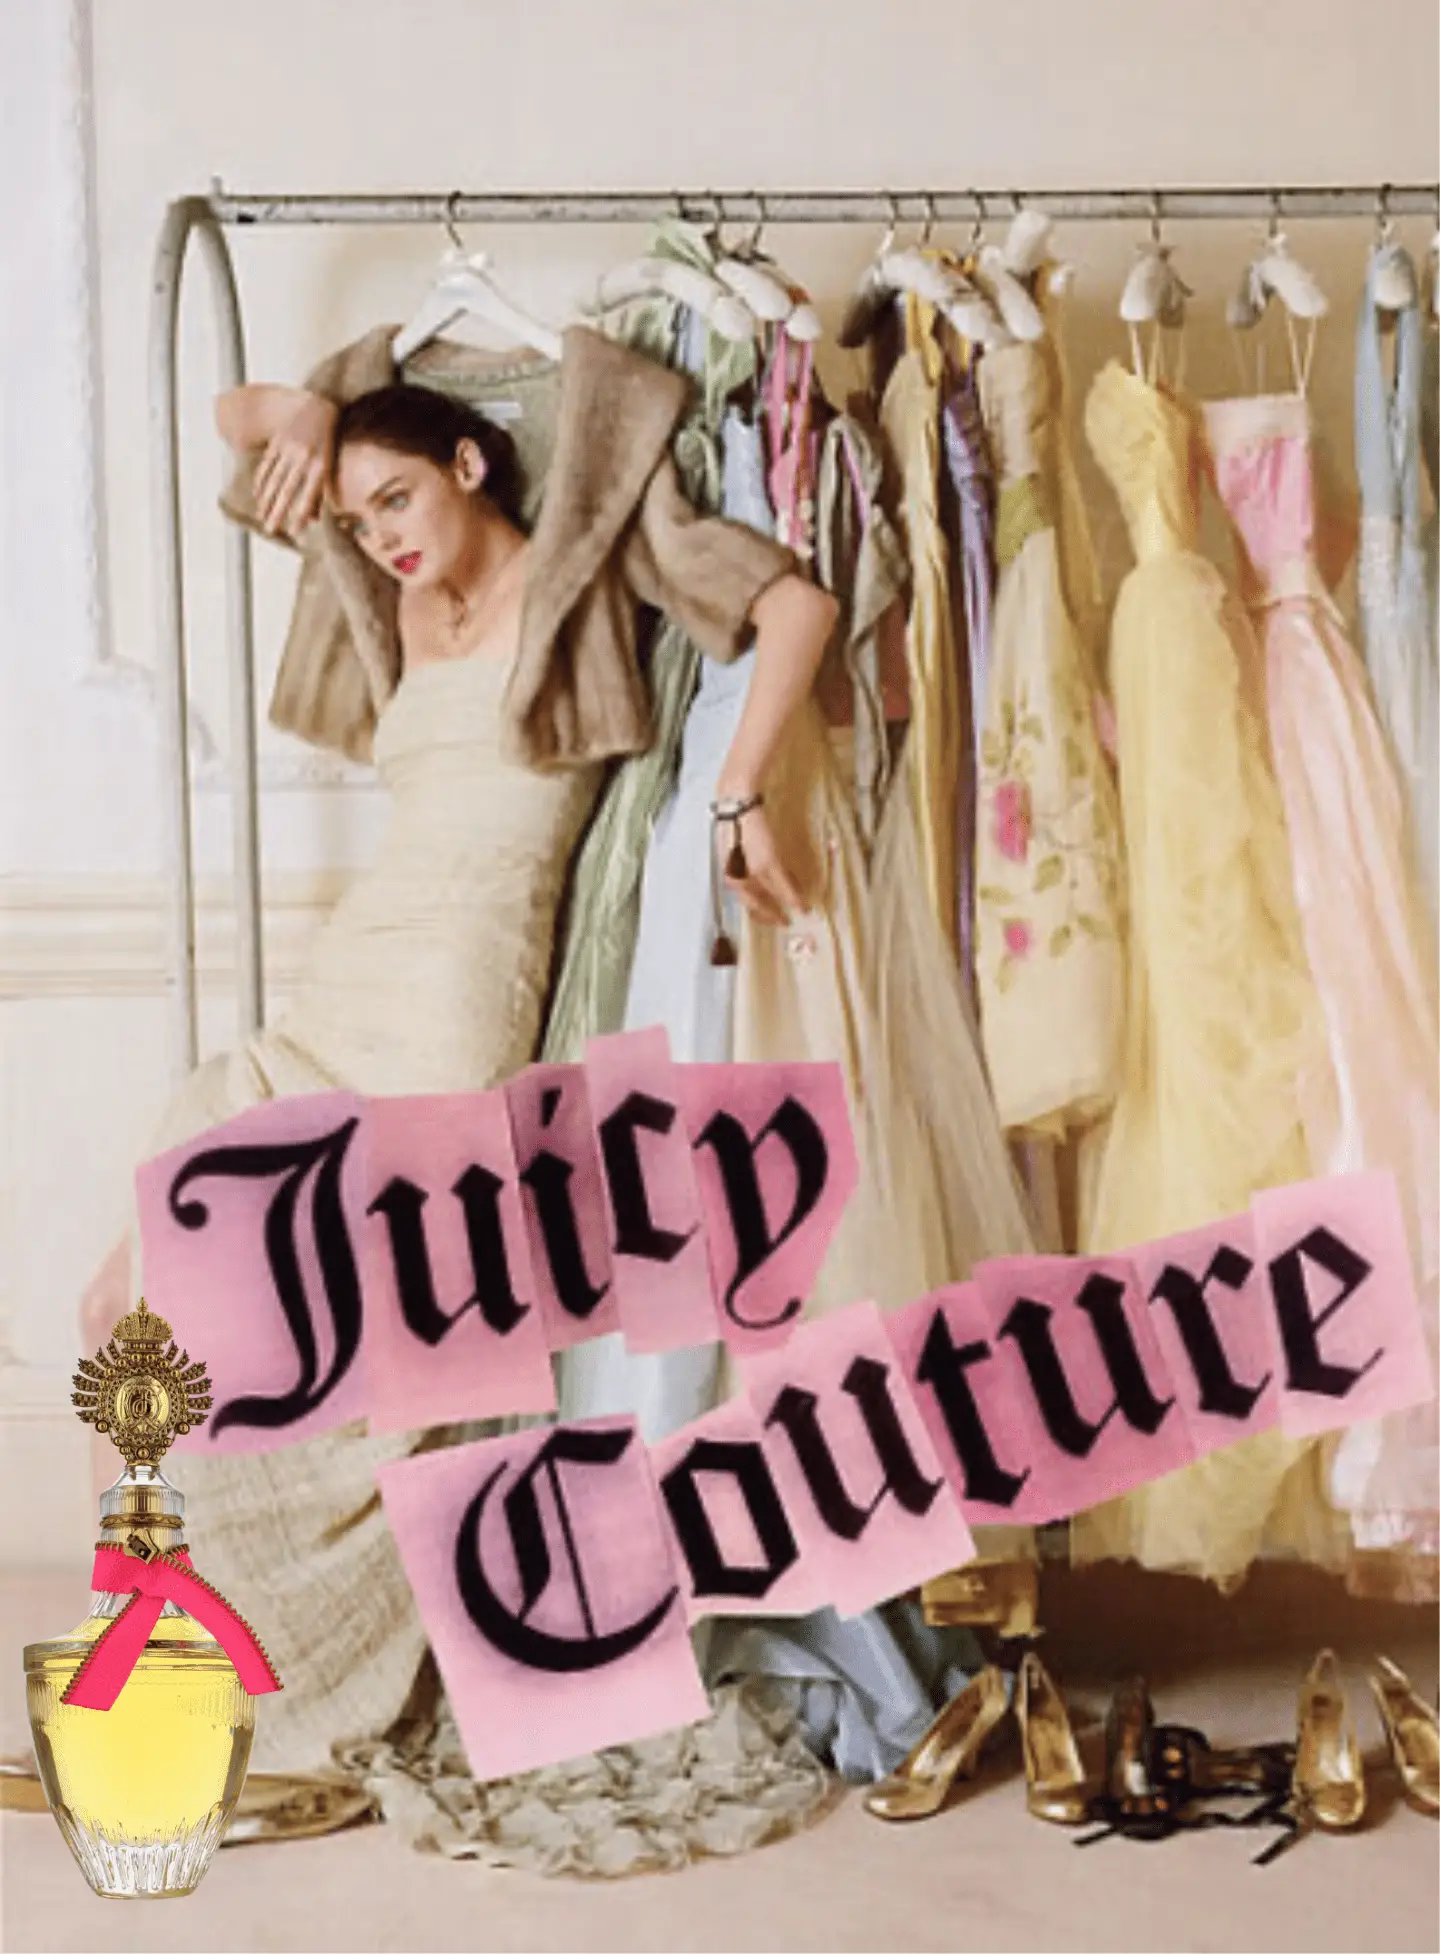 Juicy Couture, Couture Couture น้ำหอมพลัมที่ดีที่สุด